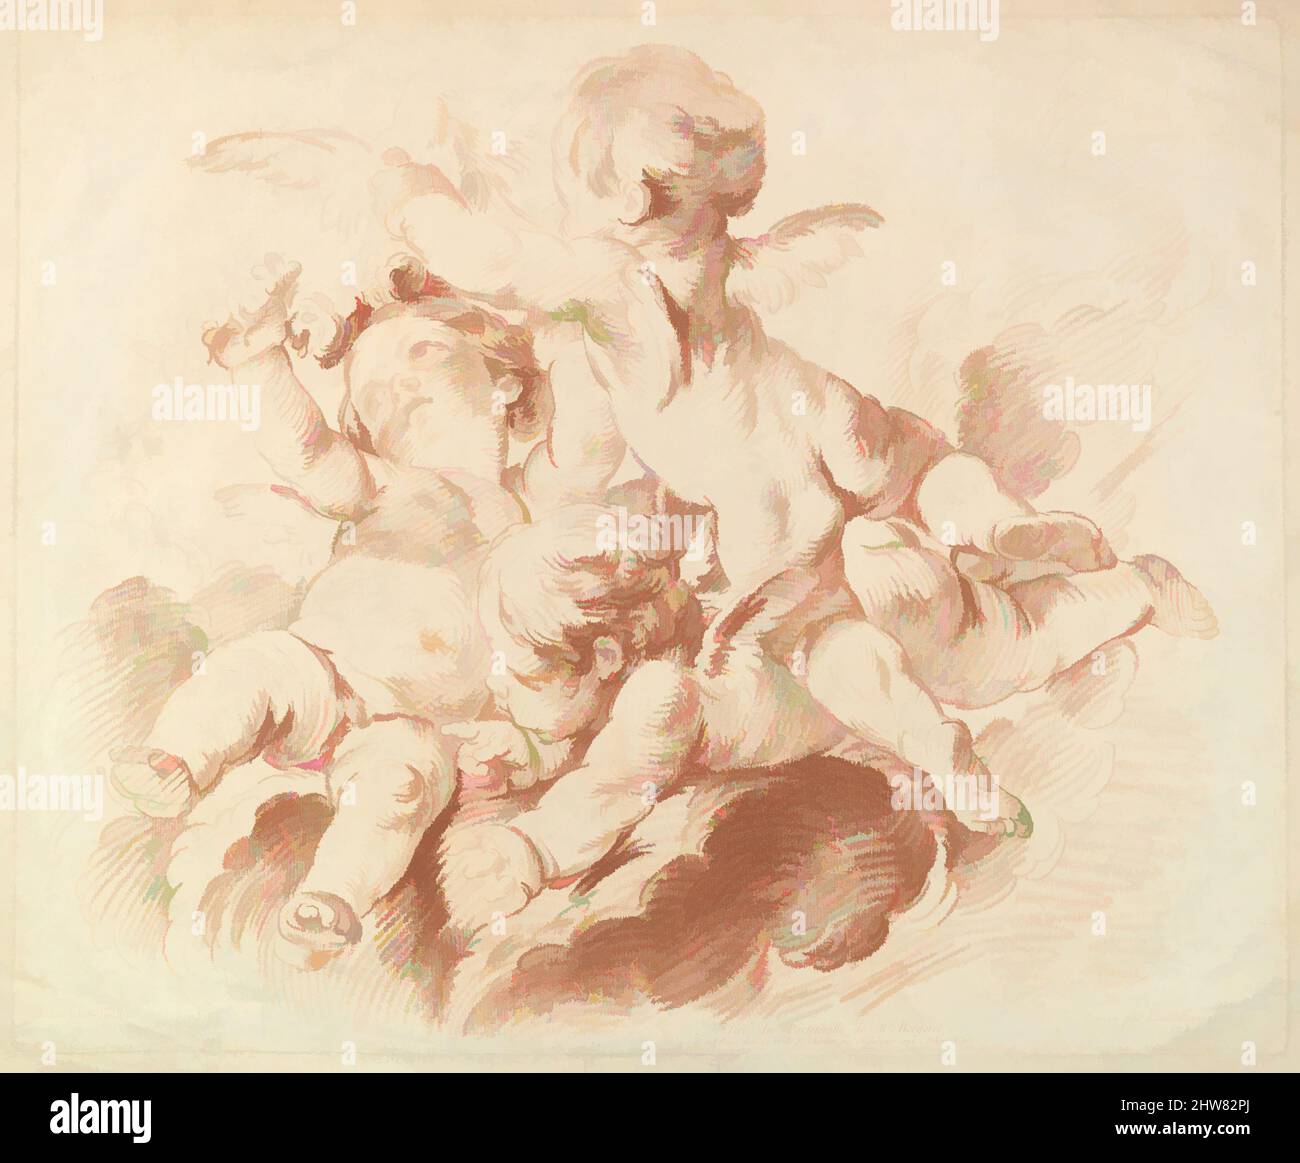 Art inspired by L'Air (The Air): A Group of Three Putti on Clouds, 18th century, Crayon-manner engraving in red ink, Sheet: 20 5/8 x 15 7/8 in. (52.4 x 40.3 cm), Prints, Louis Marin Bonnet (French, Paris 1736–1793 Saint-Mandé, Val-de-Marne), After François Boucher (French, Paris 1703–, Classic works modernized by Artotop with a splash of modernity. Shapes, color and value, eye-catching visual impact on art. Emotions through freedom of artworks in a contemporary way. A timeless message pursuing a wildly creative new direction. Artists turning to the digital medium and creating the Artotop NFT Stock Photo